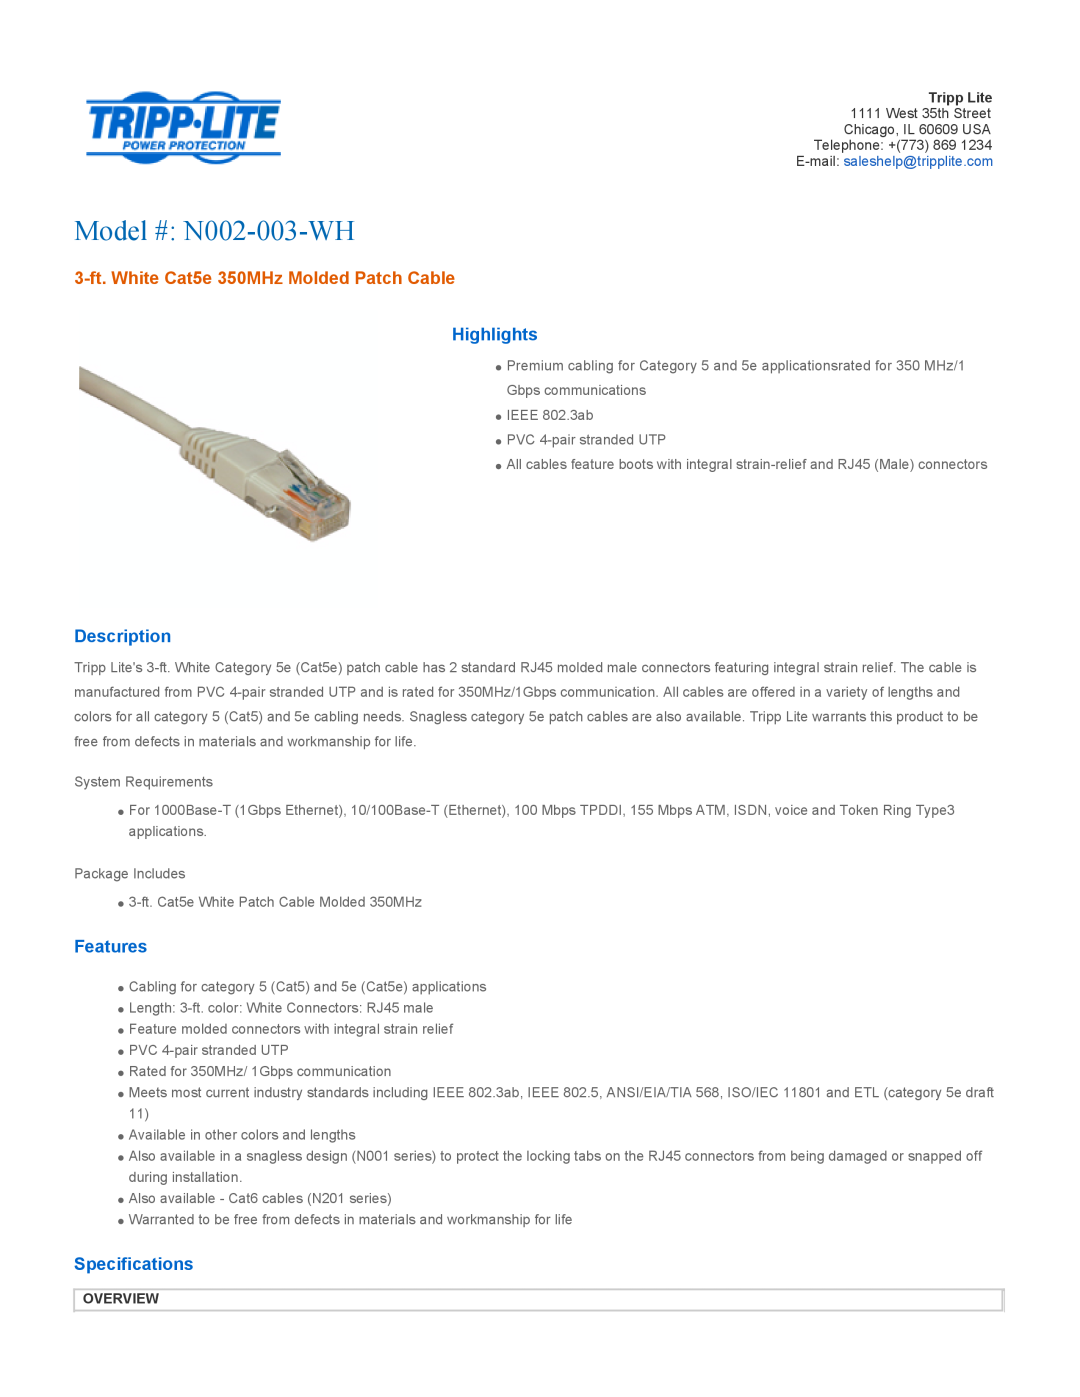 Tripp Lite specifications Overview, Model # N002-003-WH, 3-ft. White Cat5e 350MHz Molded Patch Cable, Highlights 